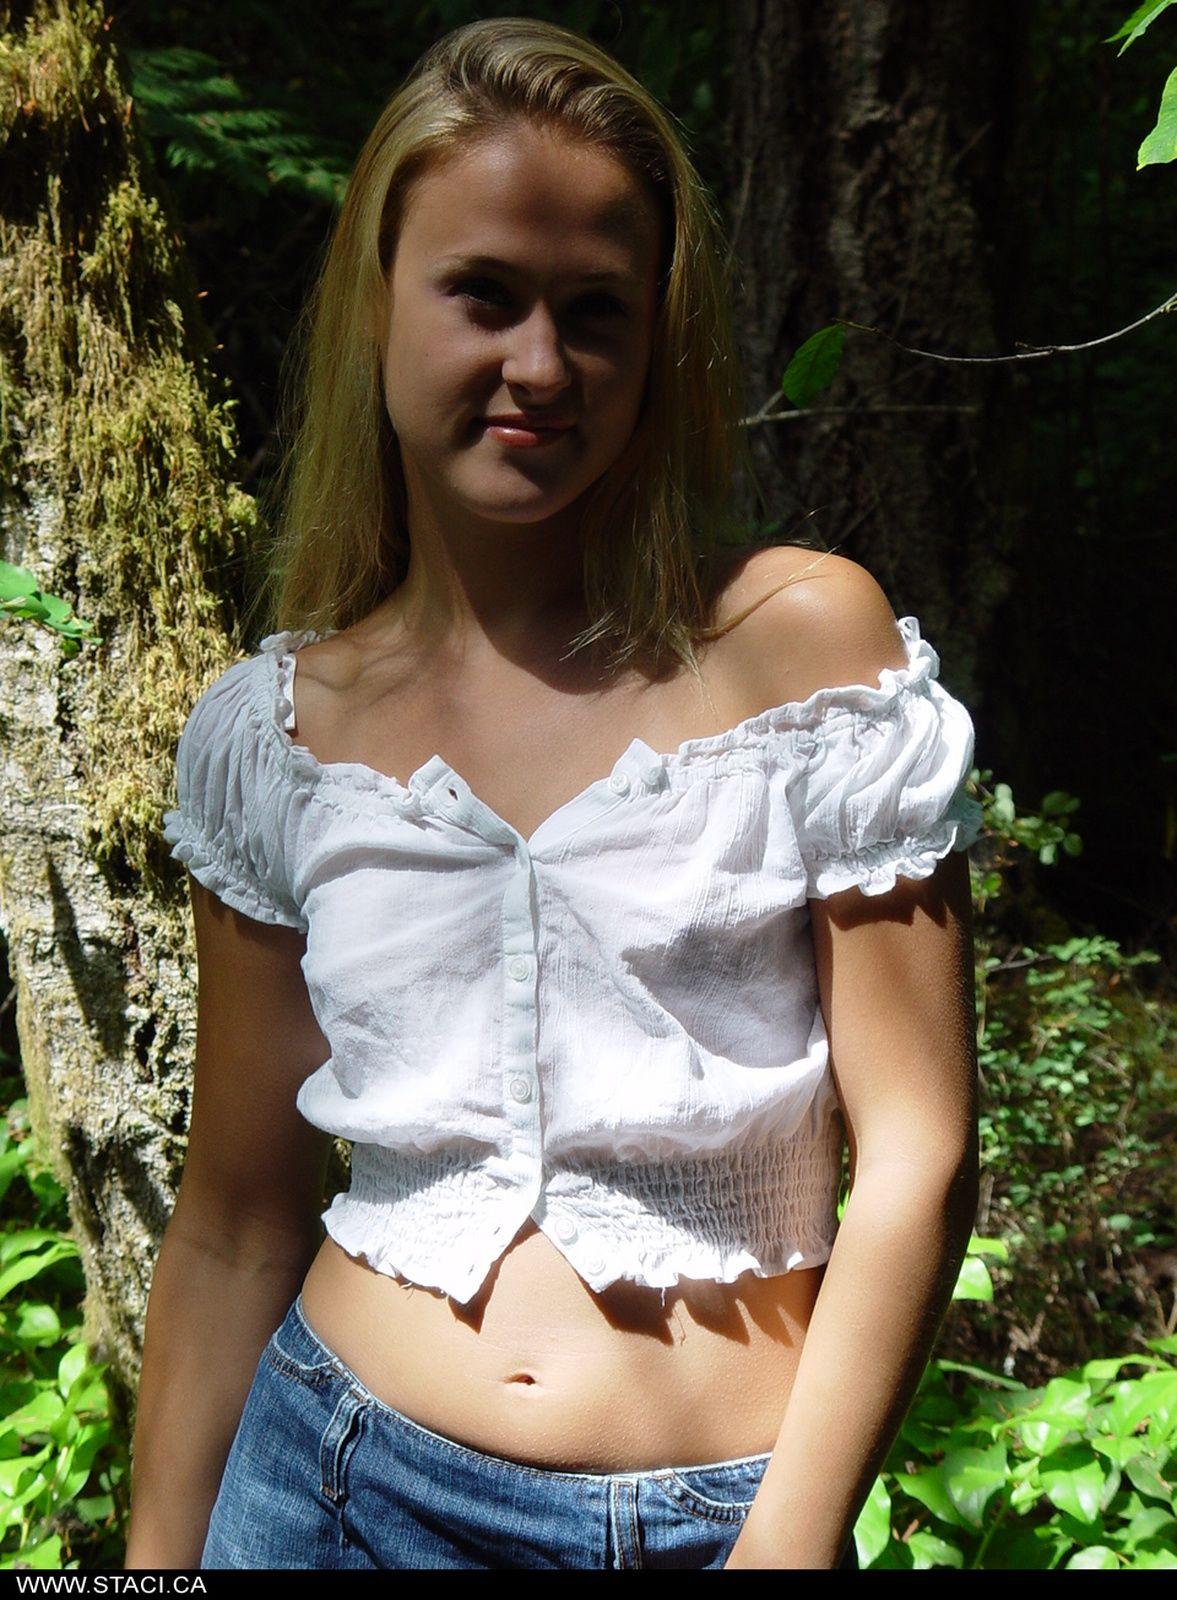 Pictures of teen Staci.ca playing with her tits outside #60003488